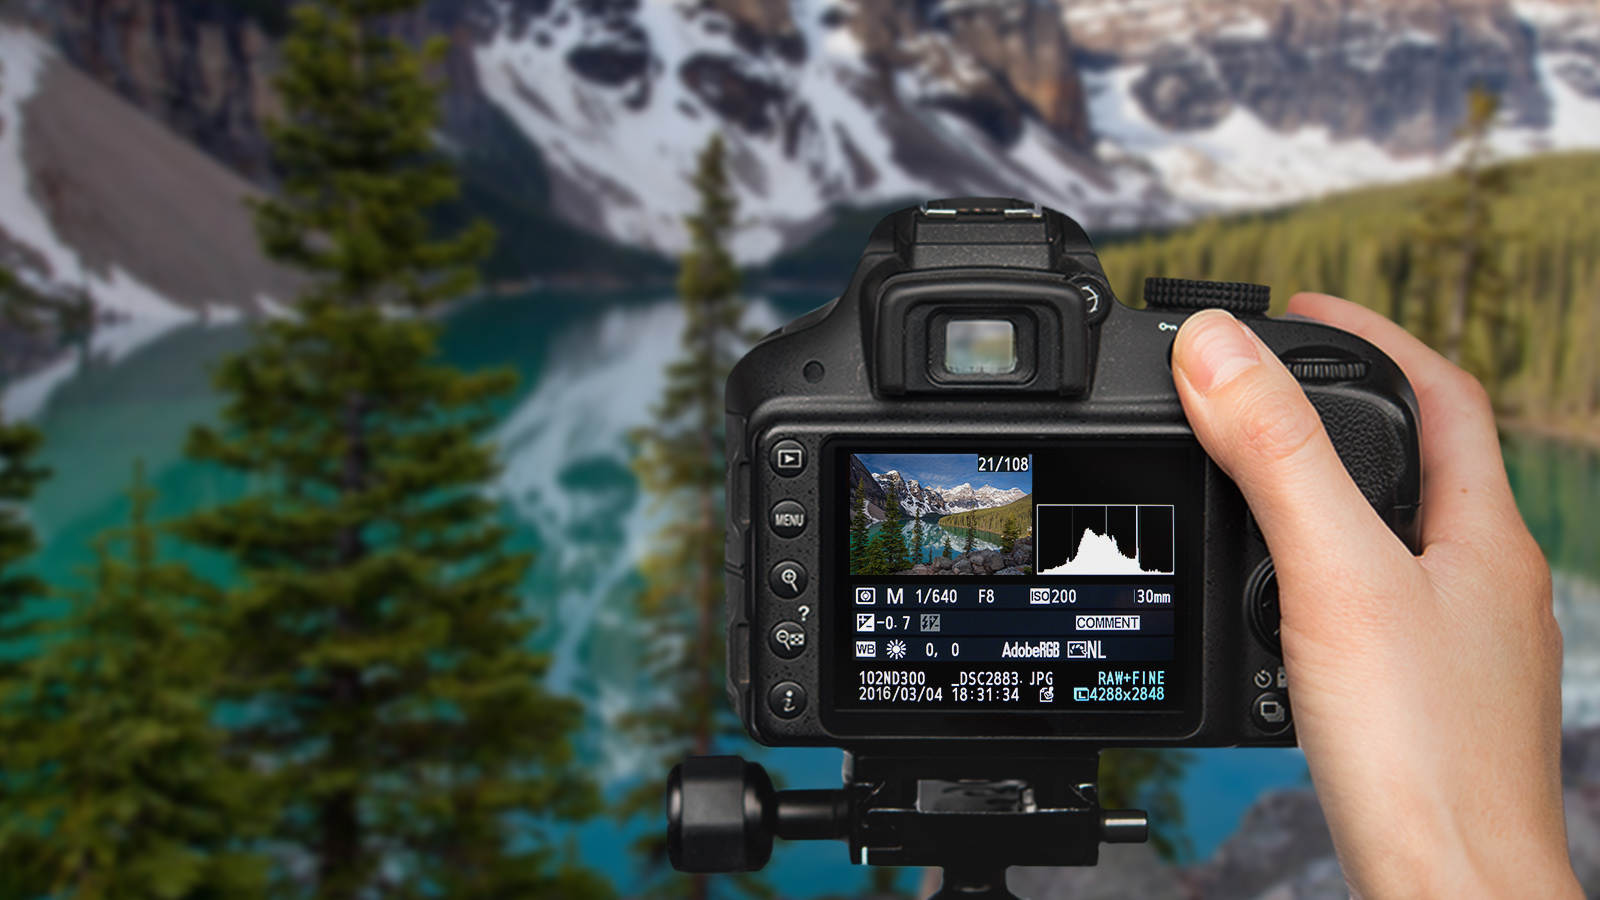 The Top Online Photography Courses for Learning New Skills